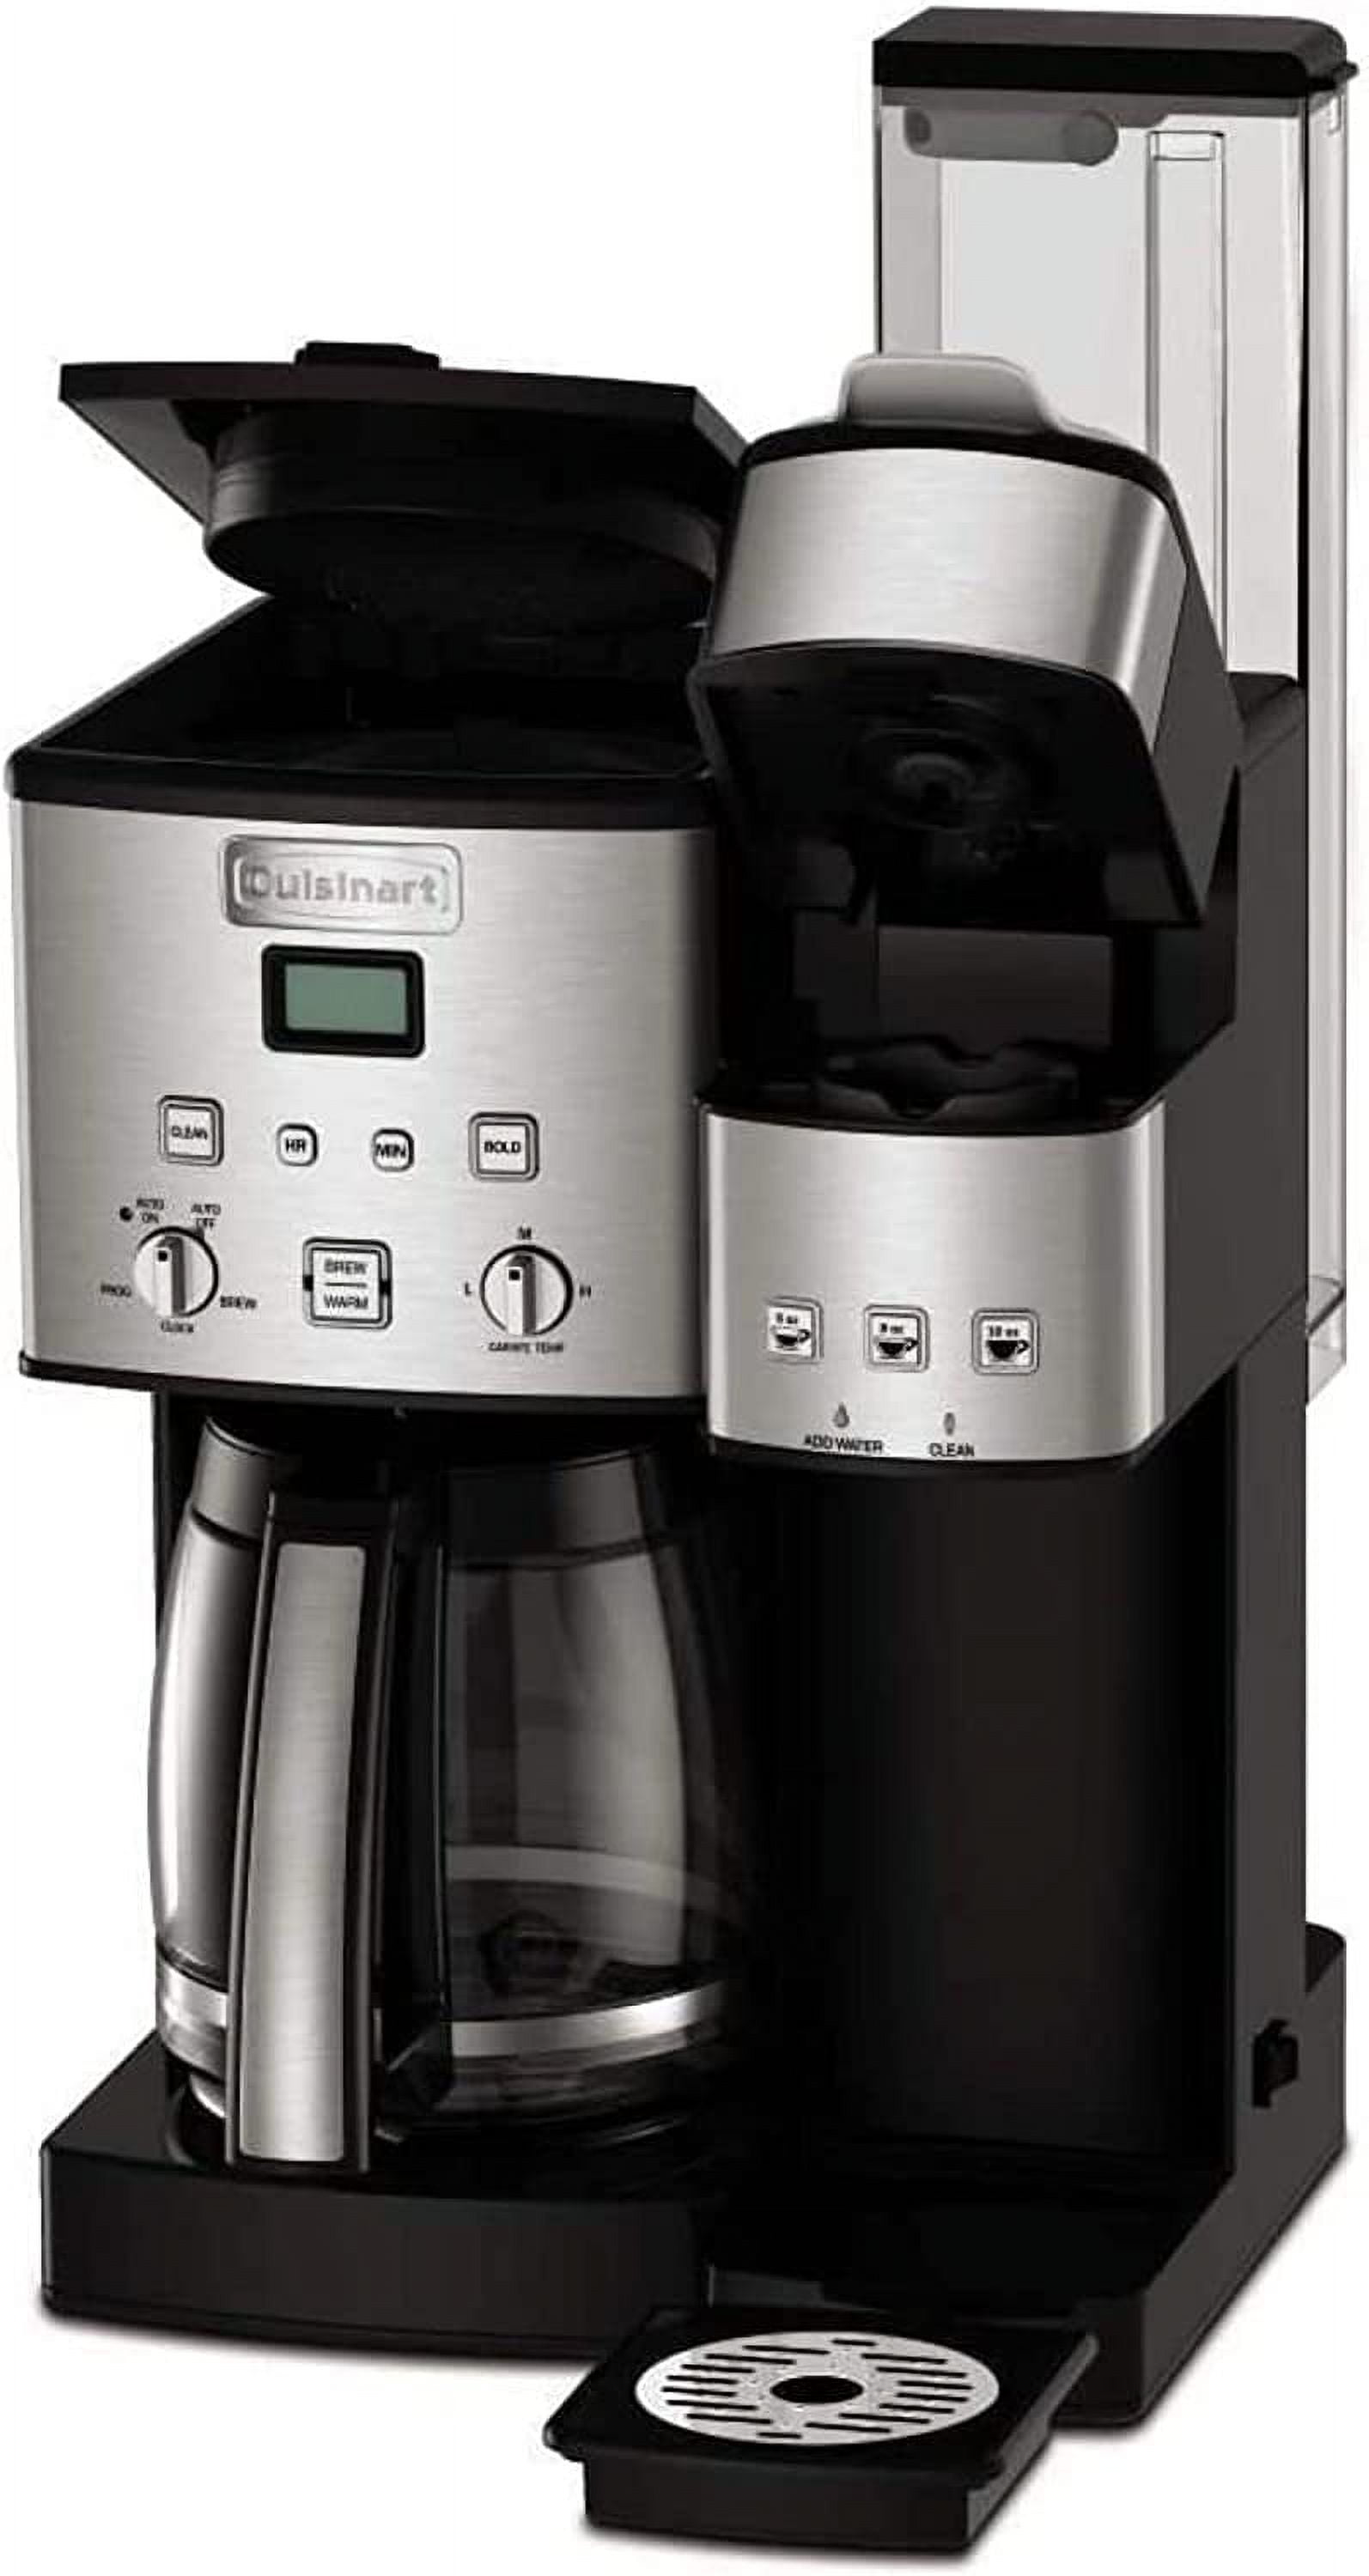 Cuisinart Stainless Steel Coffee Center Combo Coffee Maker (Black) Bundle  with Colombian Roast Single Serve KCup and Stainless Steel Tumbler (3 Items)